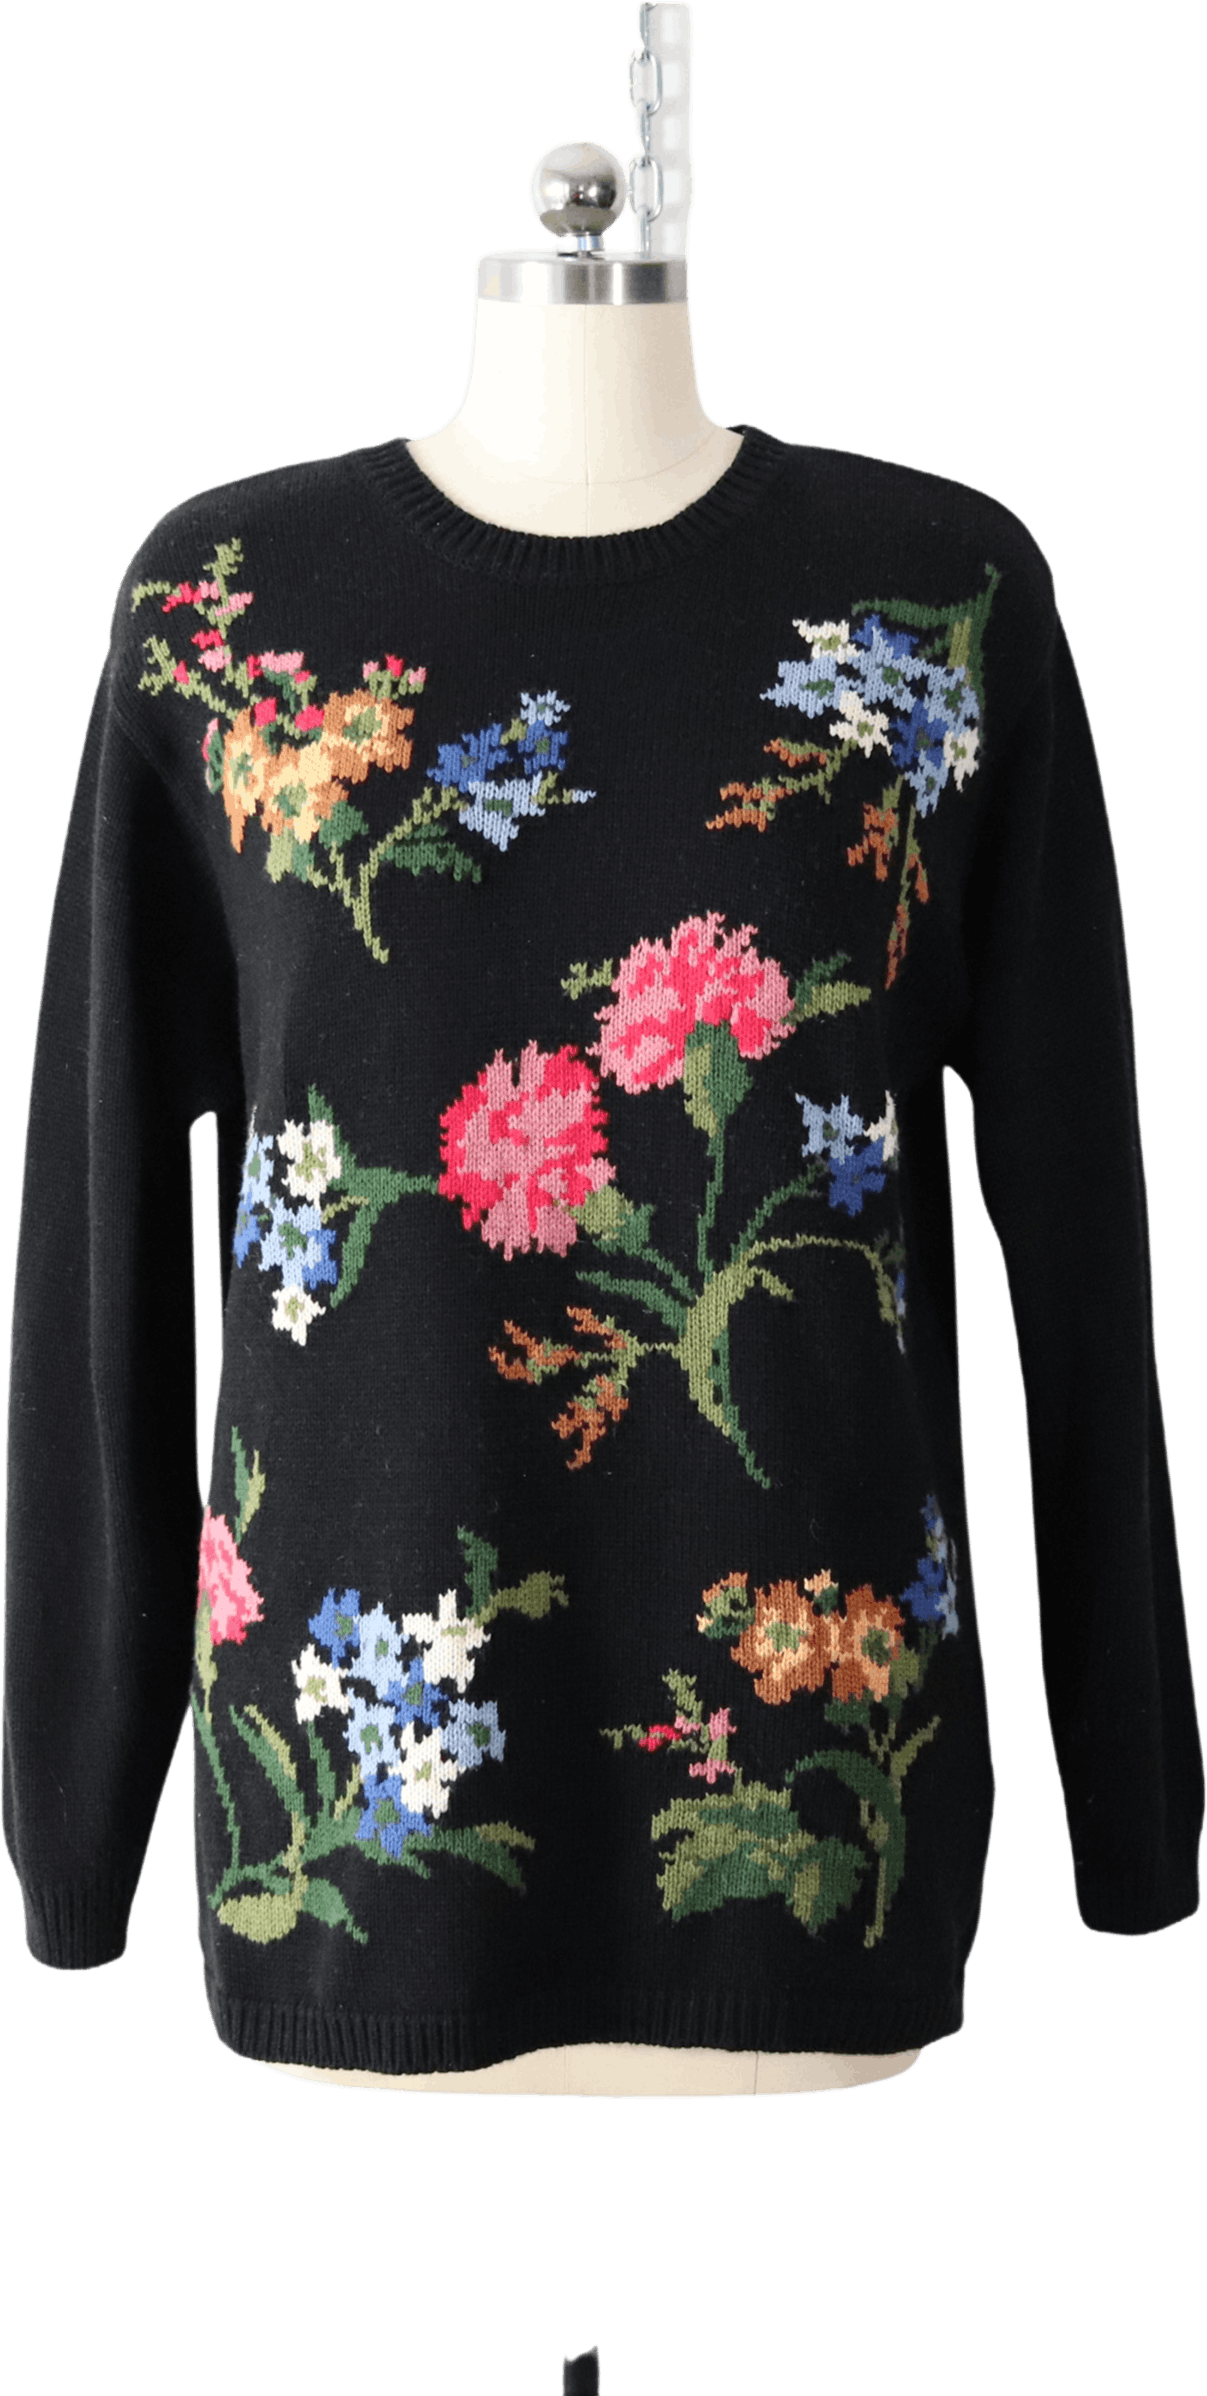 Vintage 90's Botanical Floral Knit Sweater by Jh Collectibles | Shop ...